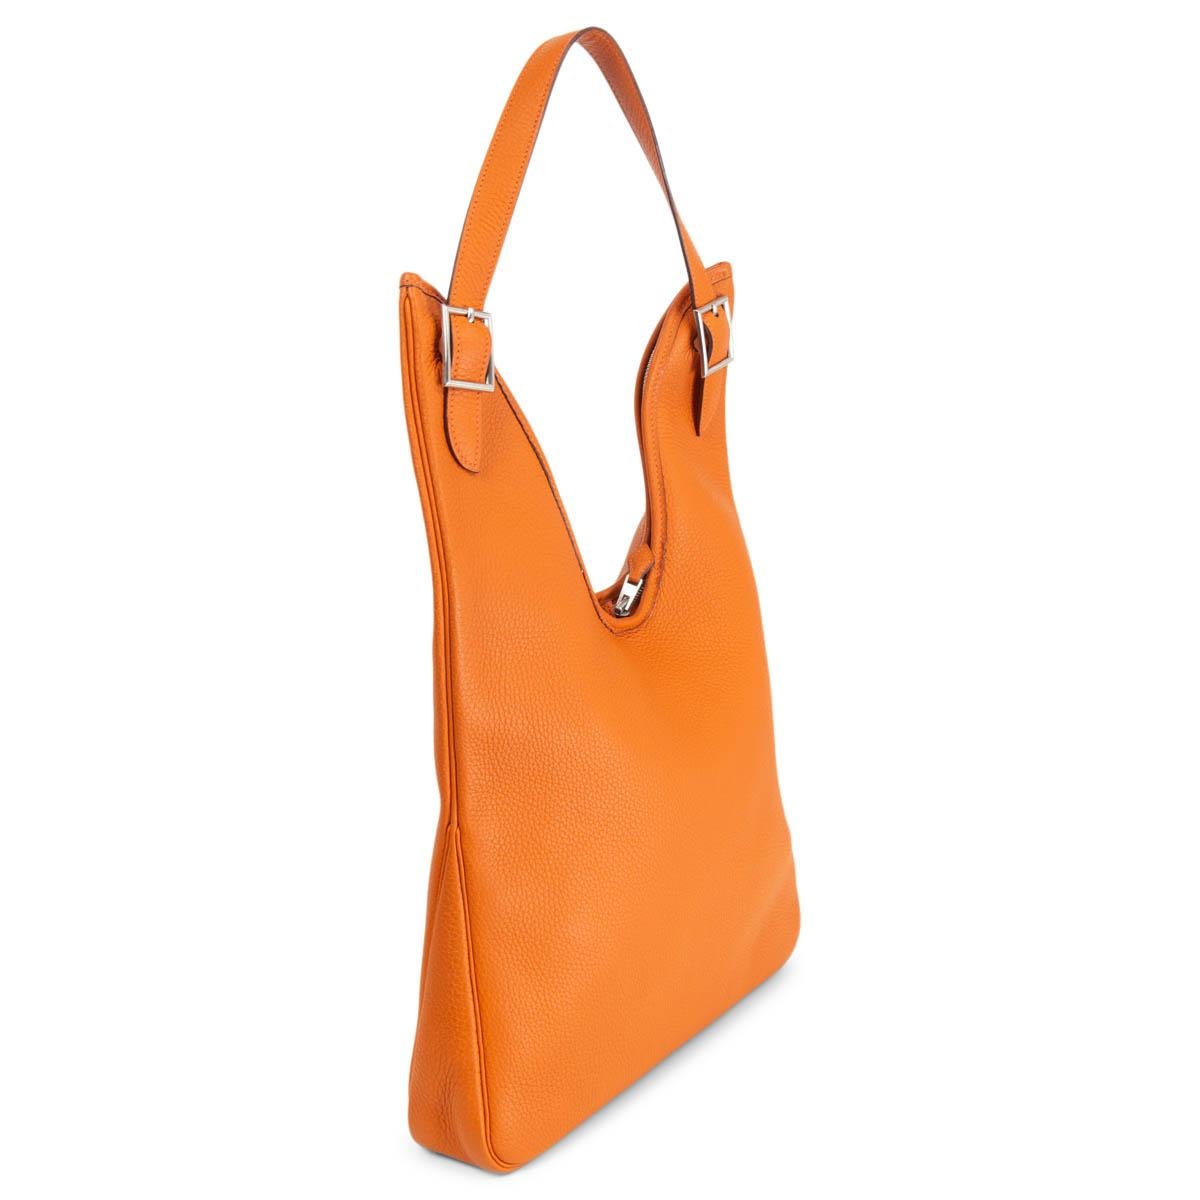 100% authentic Hermès Massai PM hobo in orange Taurillon Clemence leather with Palladium hardware. Opens with a two-way zipper on top and is lined in classic off-white Hermès canvas with one zipper pocket against the back. Comes with a long and